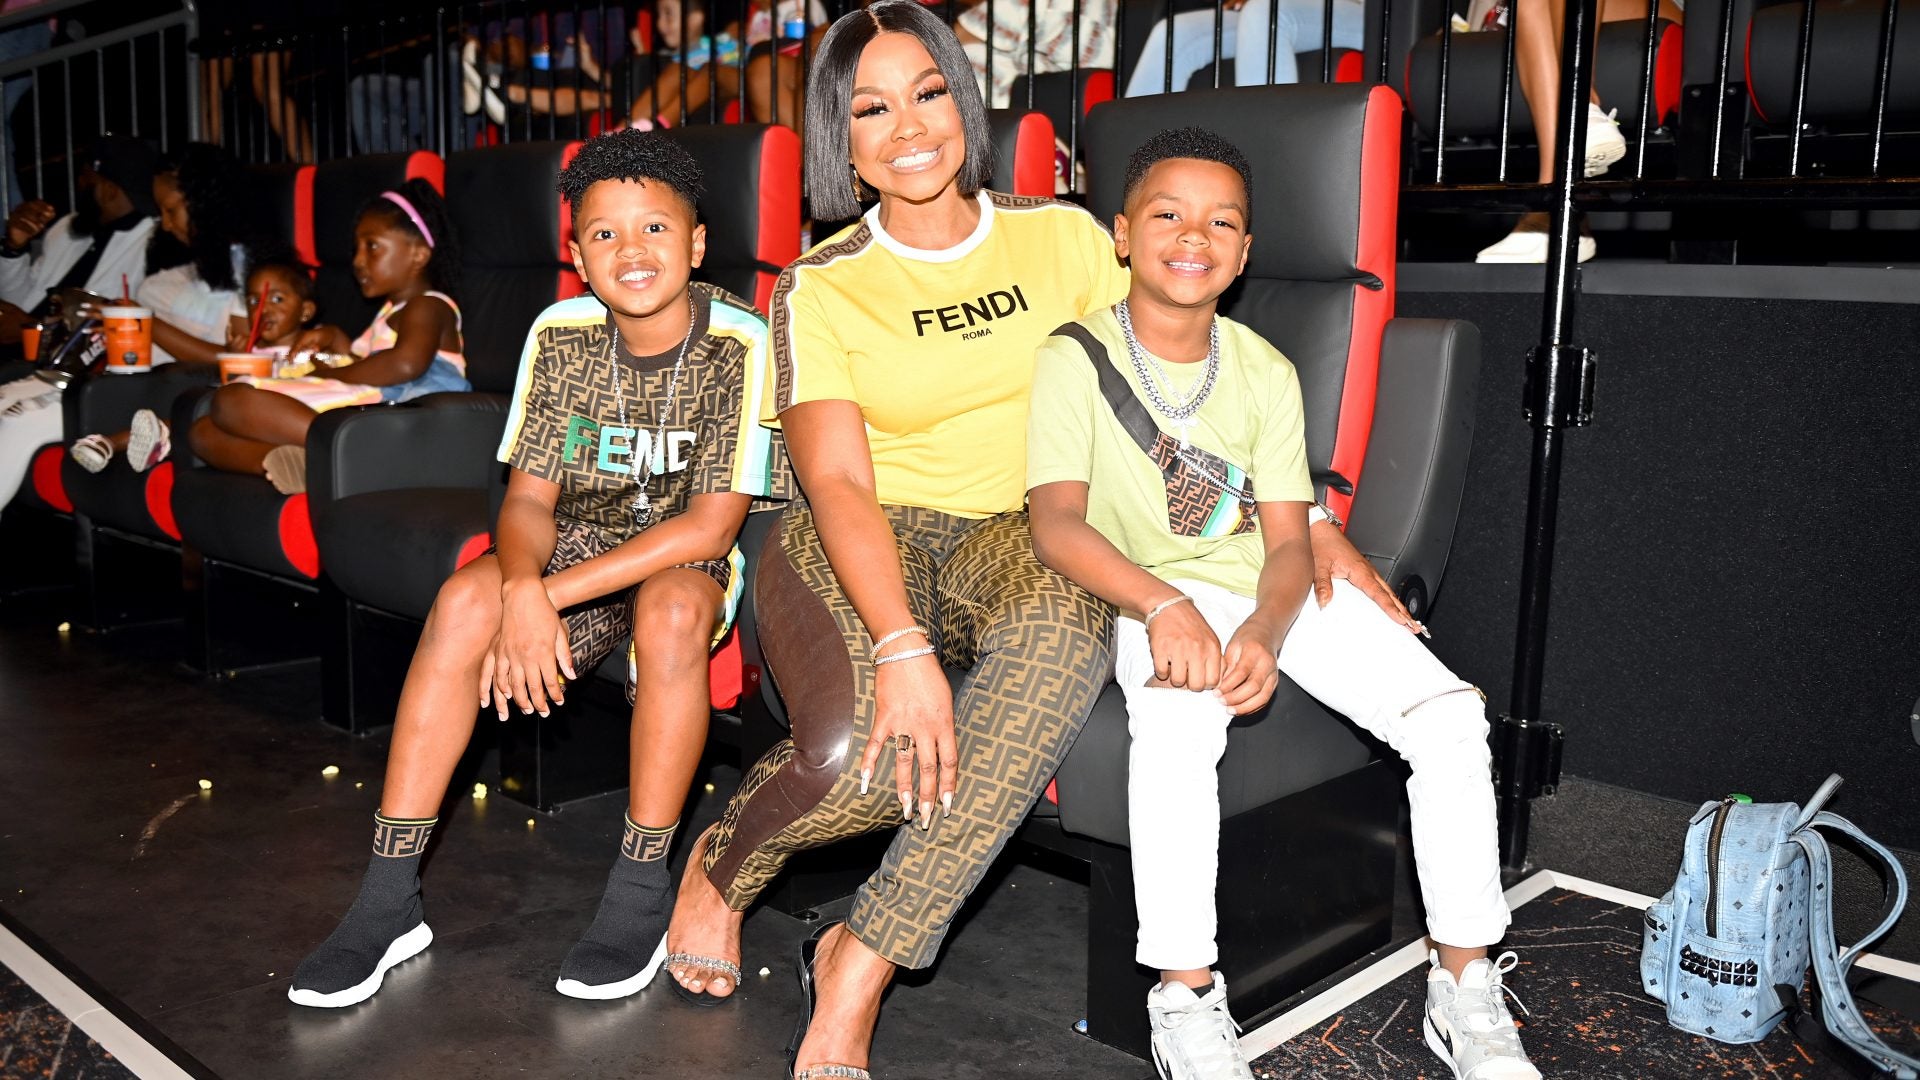 Phaedra Parks Bought Son Ayden An Investment Property For His 13th Birthday: 'He Wanted A Dirt Bike'